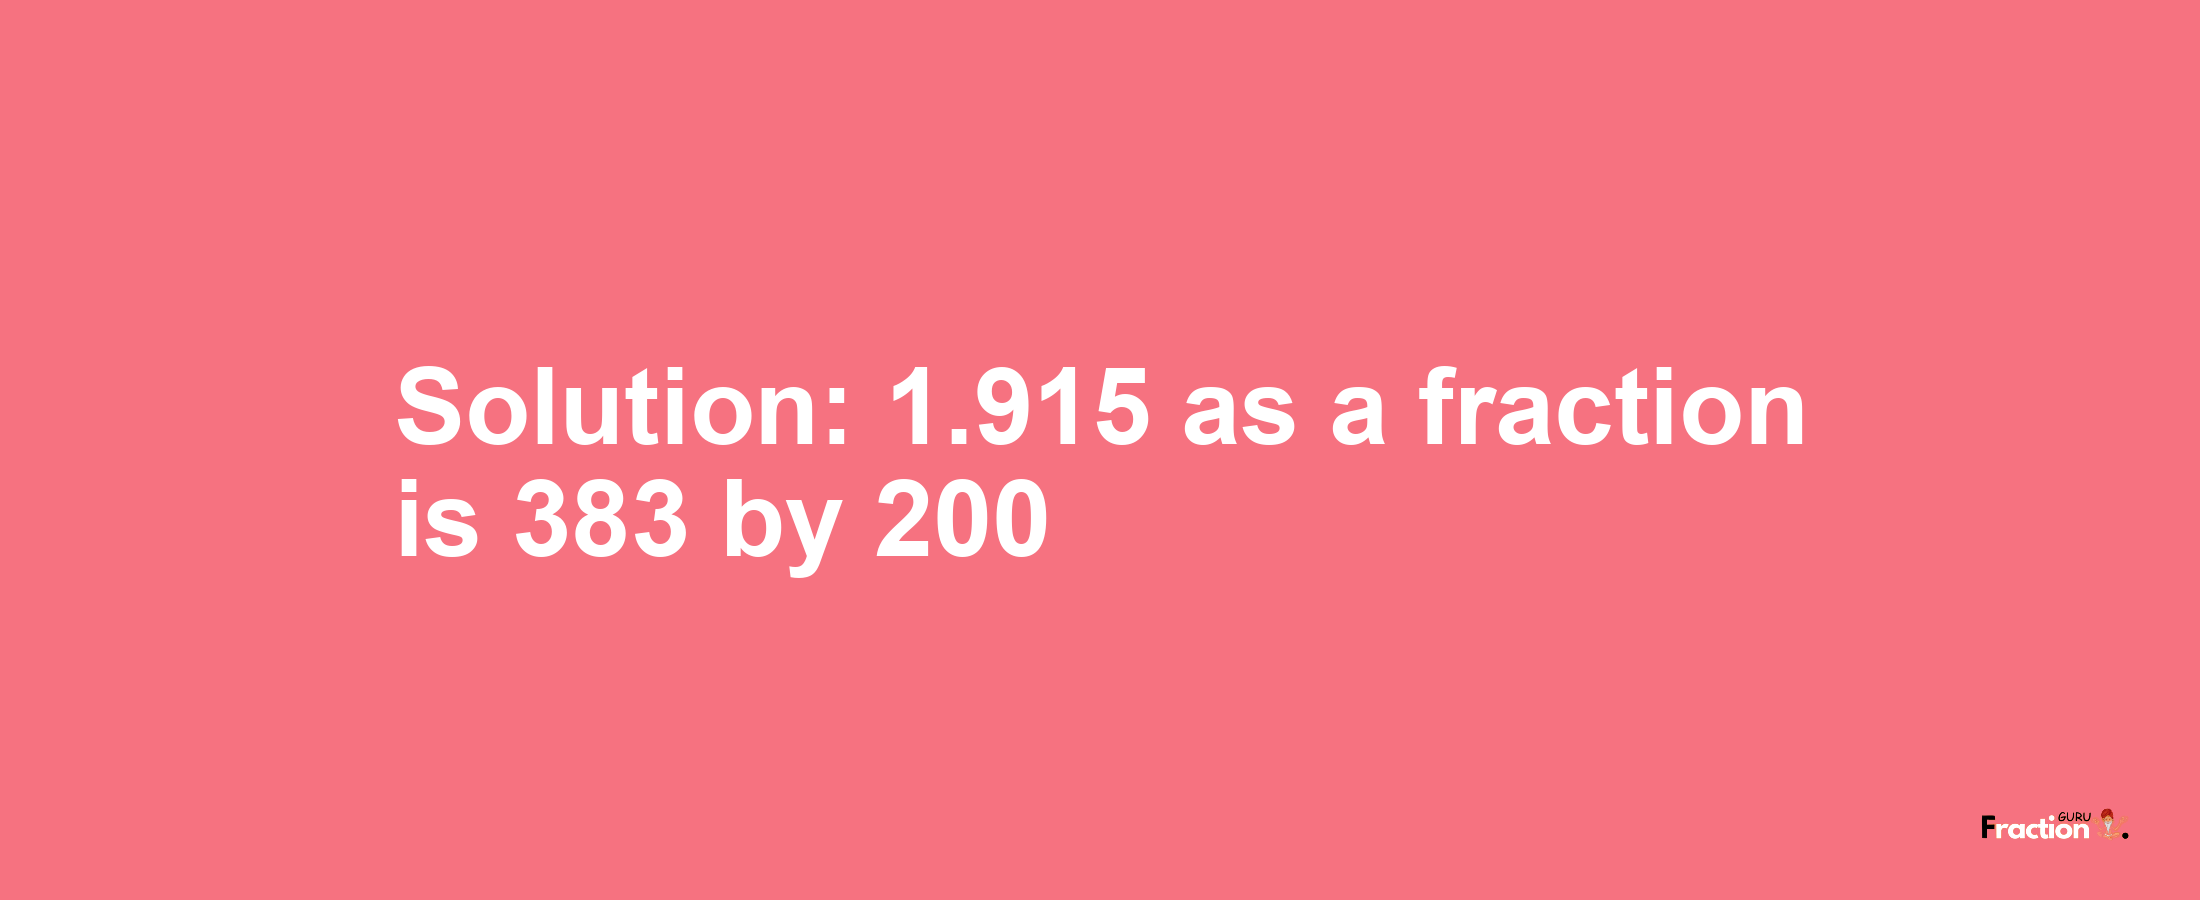 Solution:1.915 as a fraction is 383/200